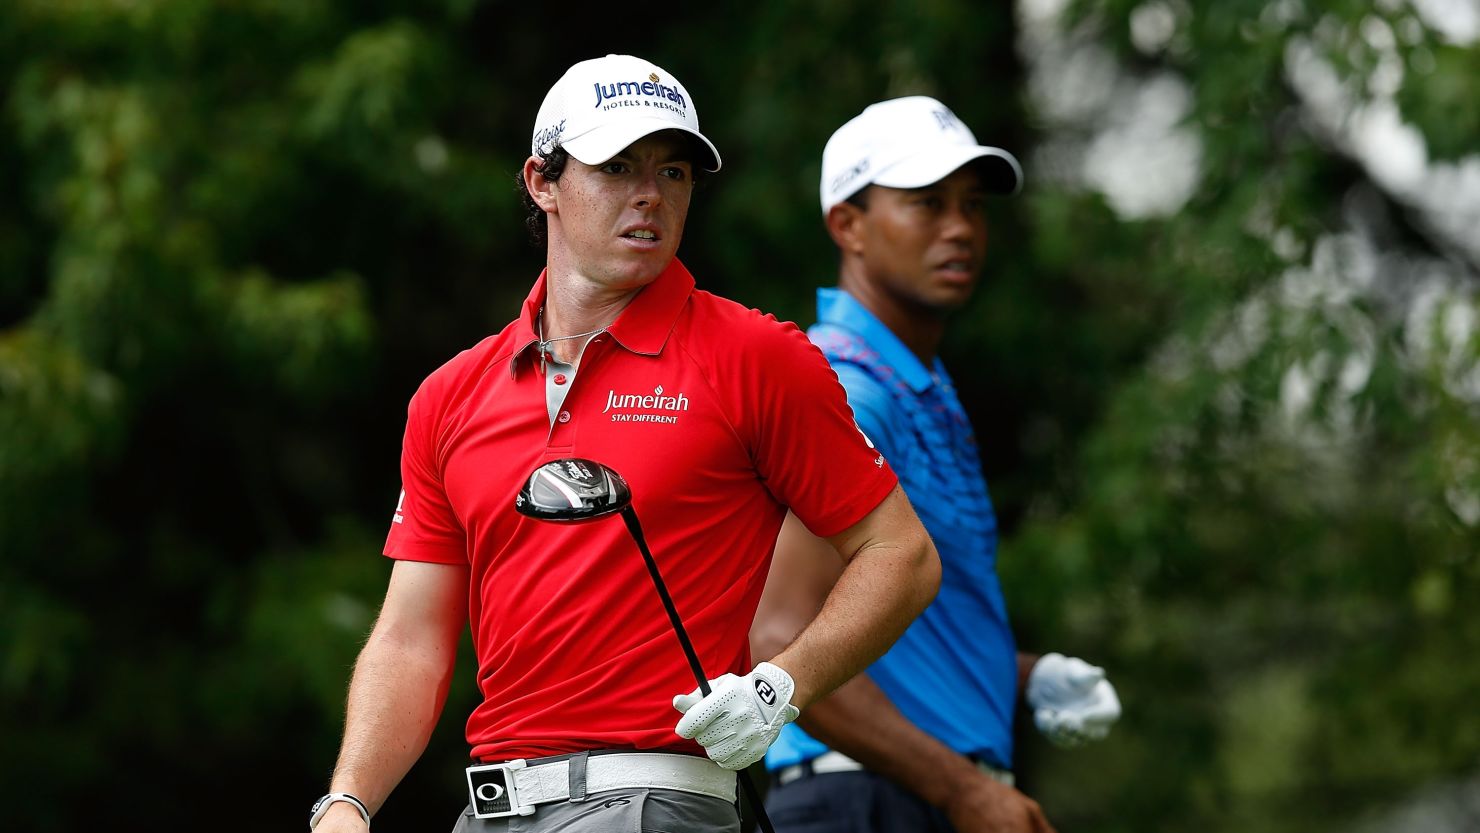 Rory McIlroy and Tiger Woods will fight it out at the PGA Tour Championship in Atlanta with both men desperate for victory.